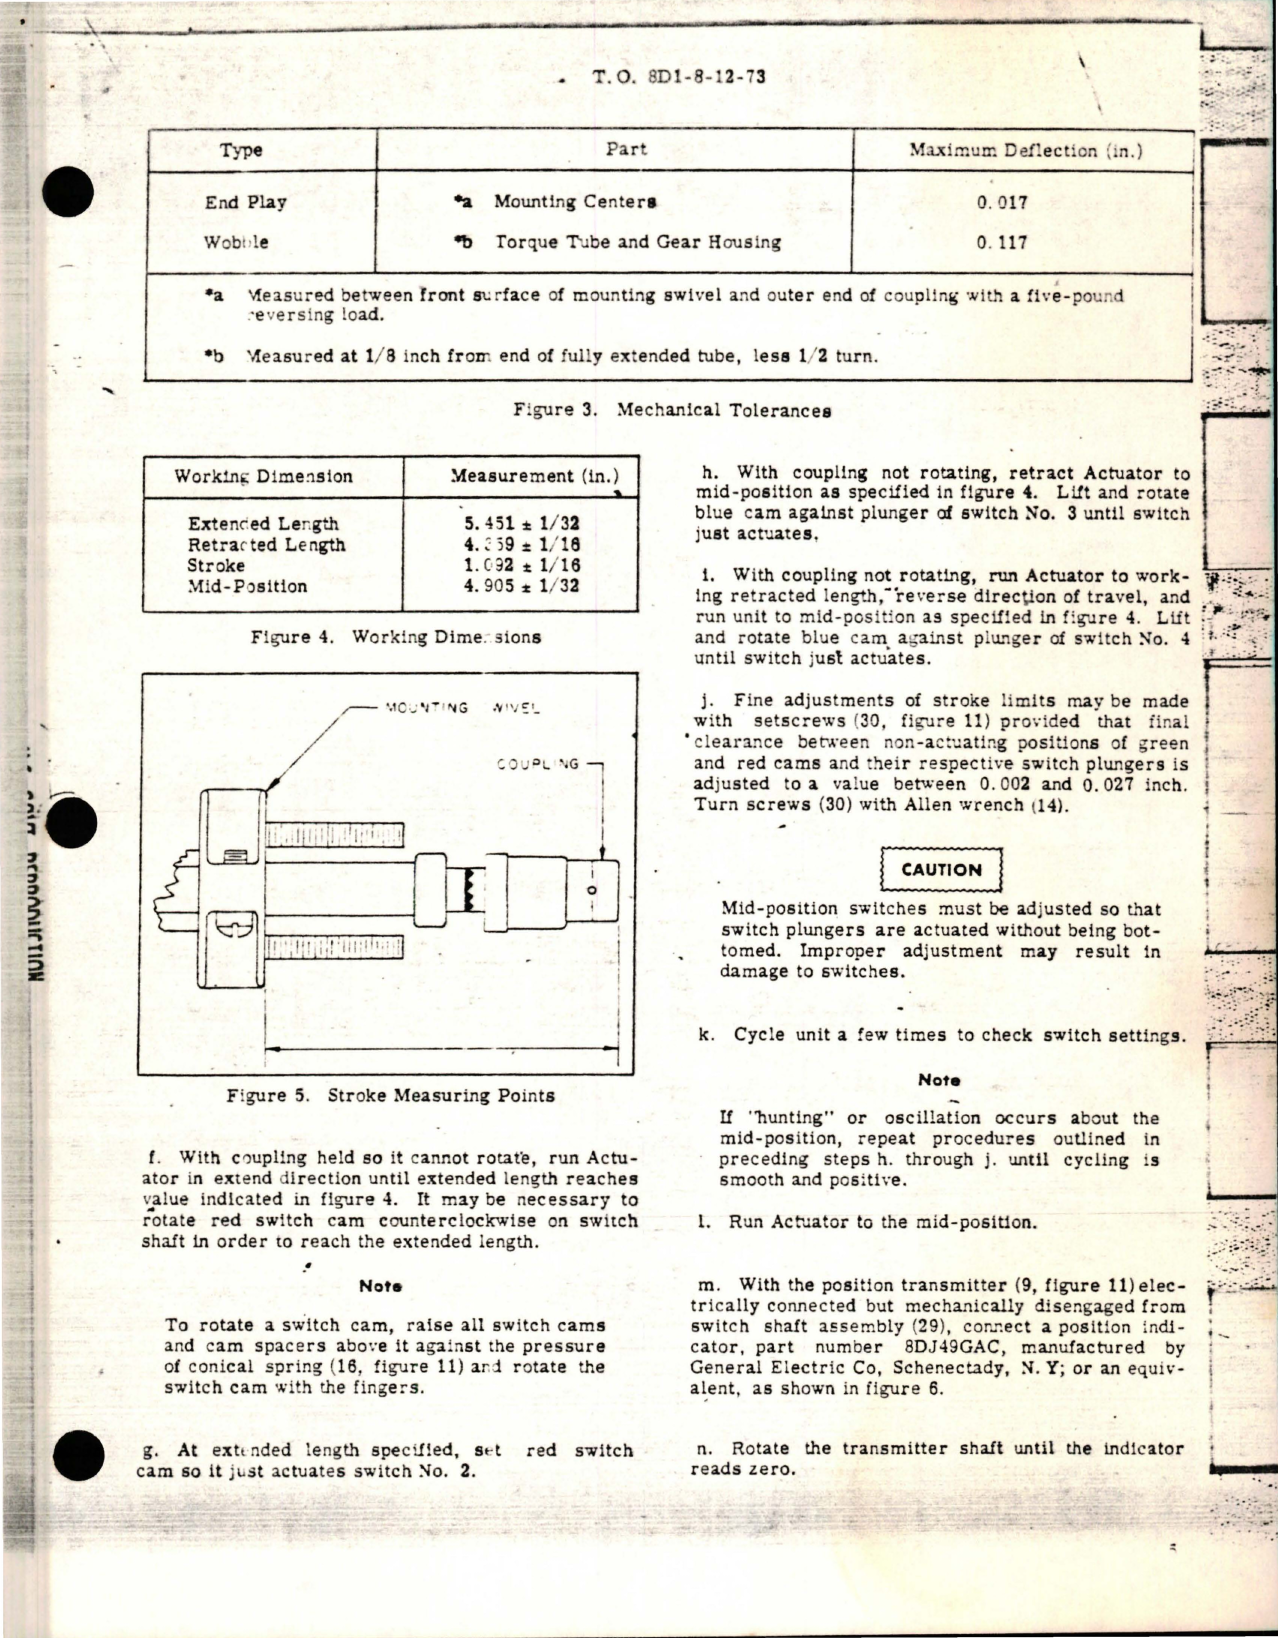 Sample page 5 from AirCorps Library document: Overhaul with Parts Breakdown for Linear Actuator - Part 99662-06 